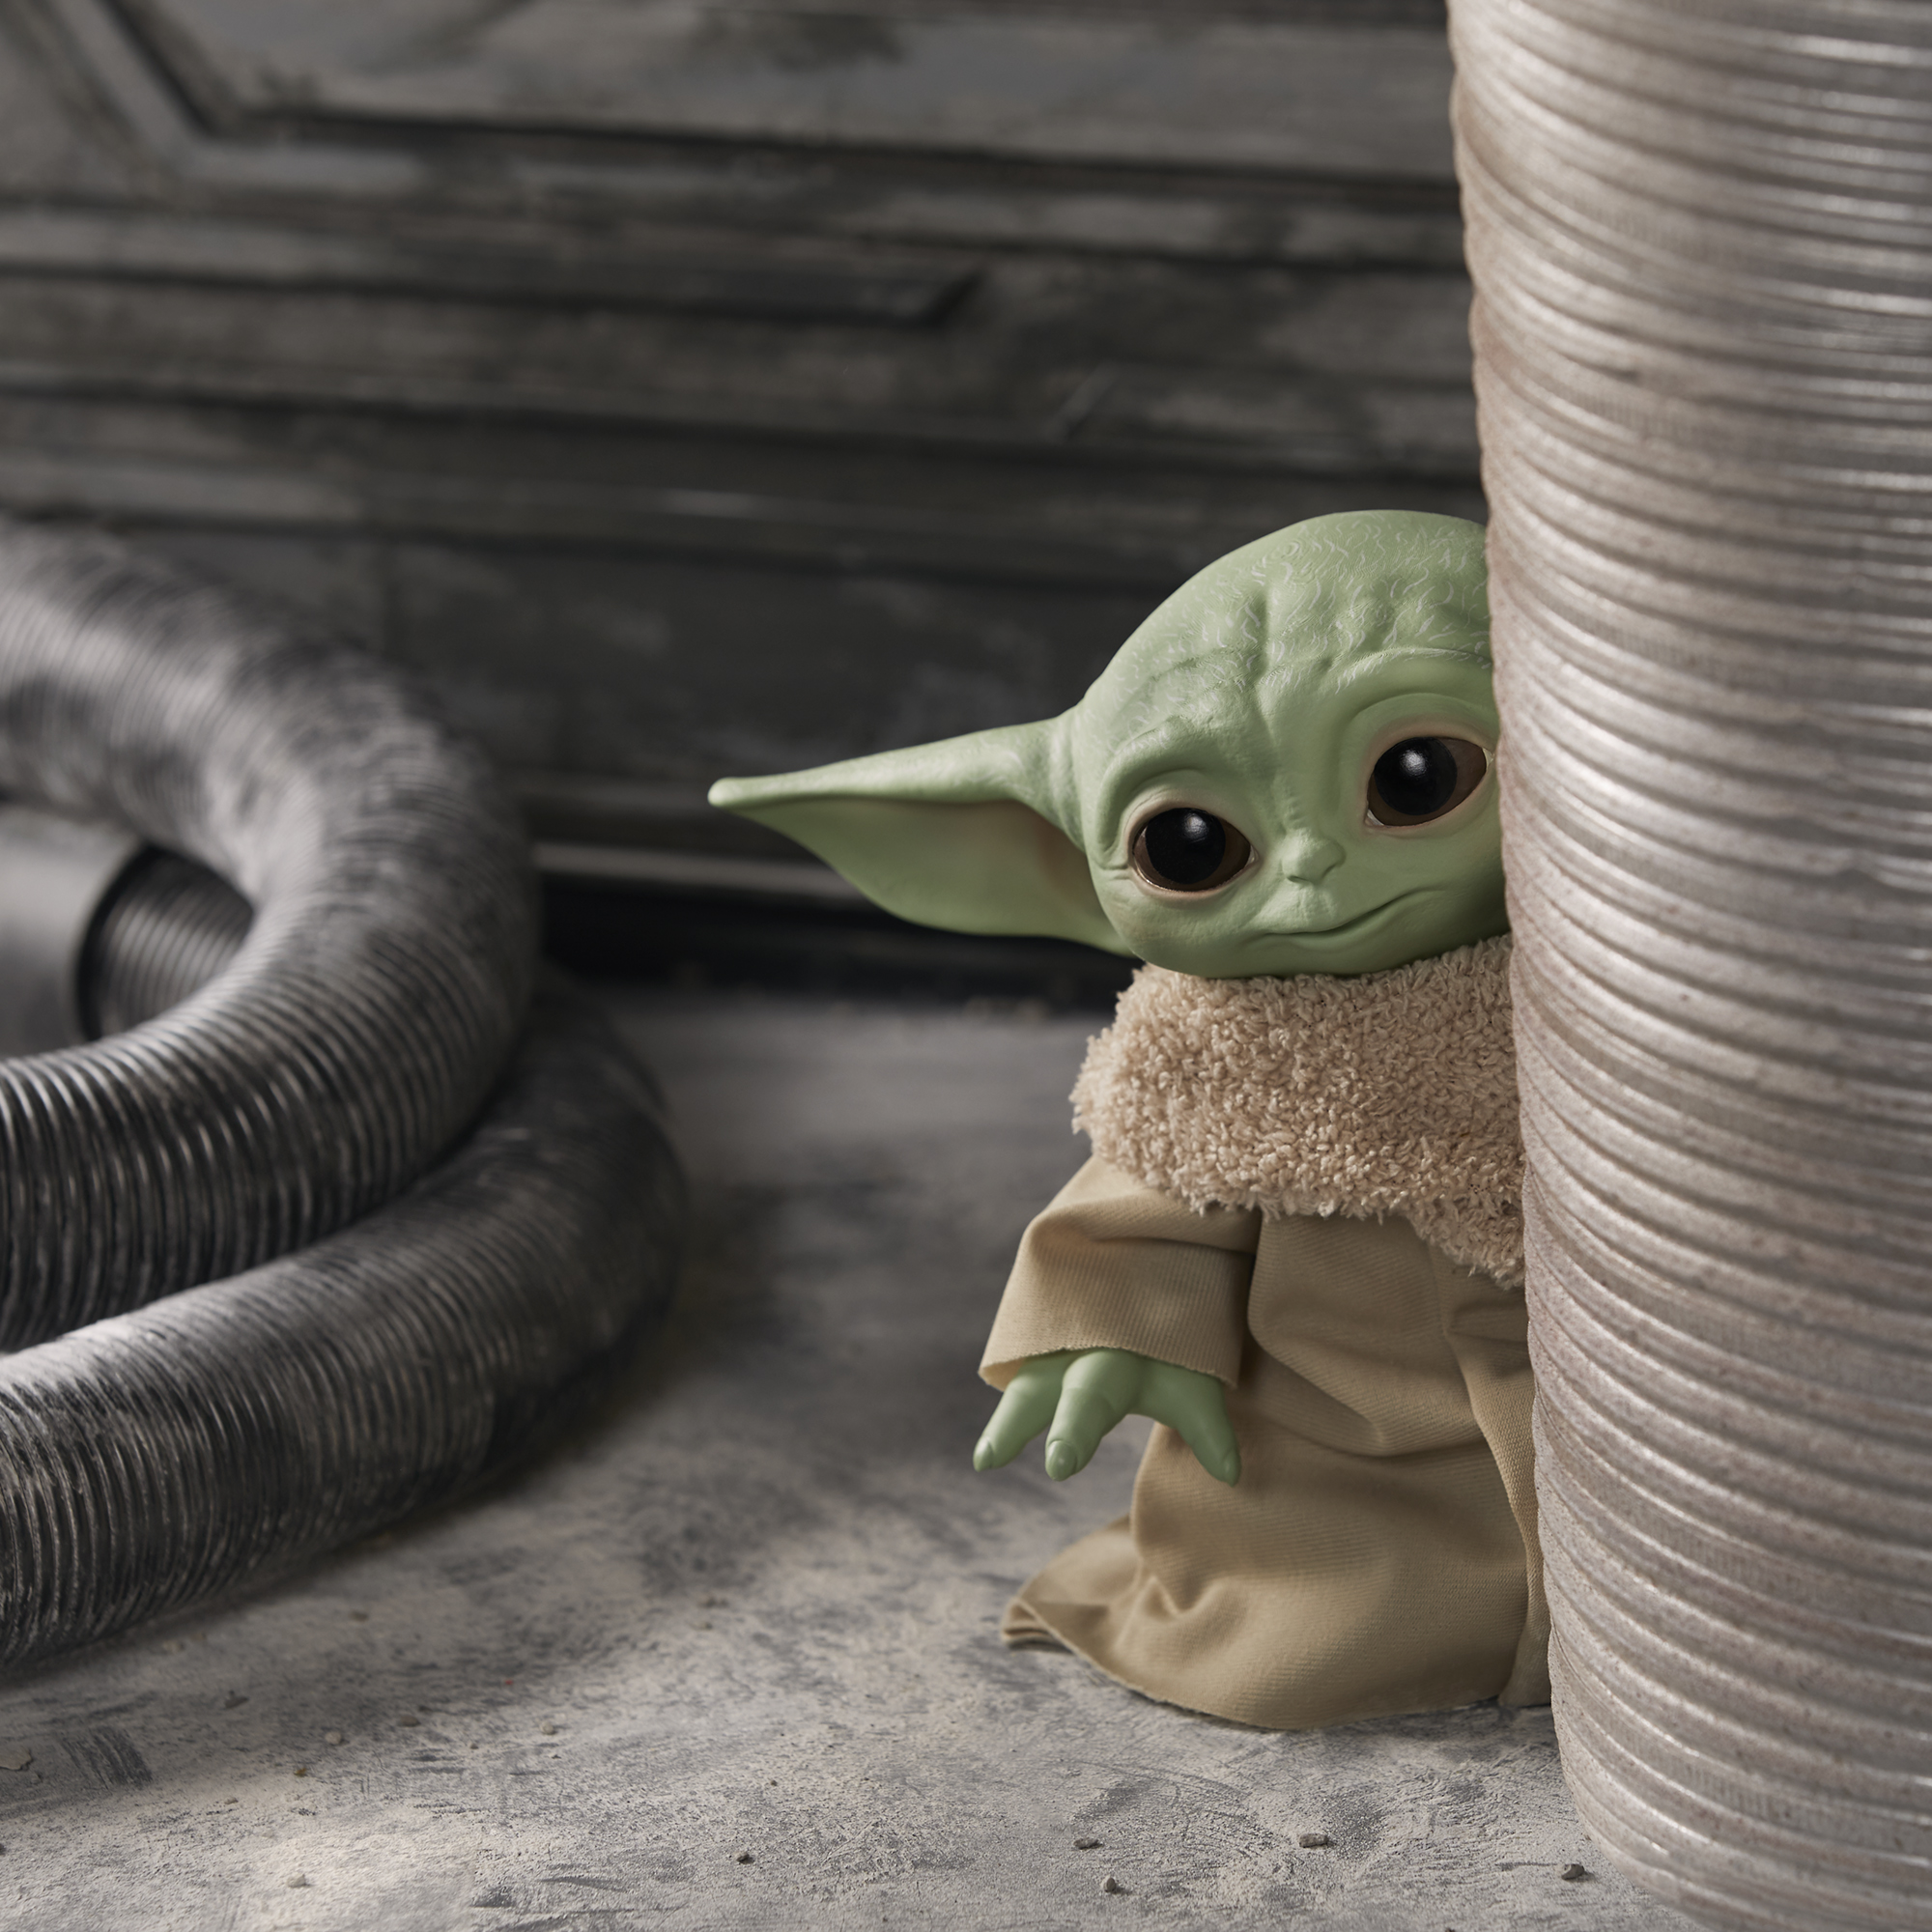 Star Wars The Child Talking Plush Toy - image 5 of 7